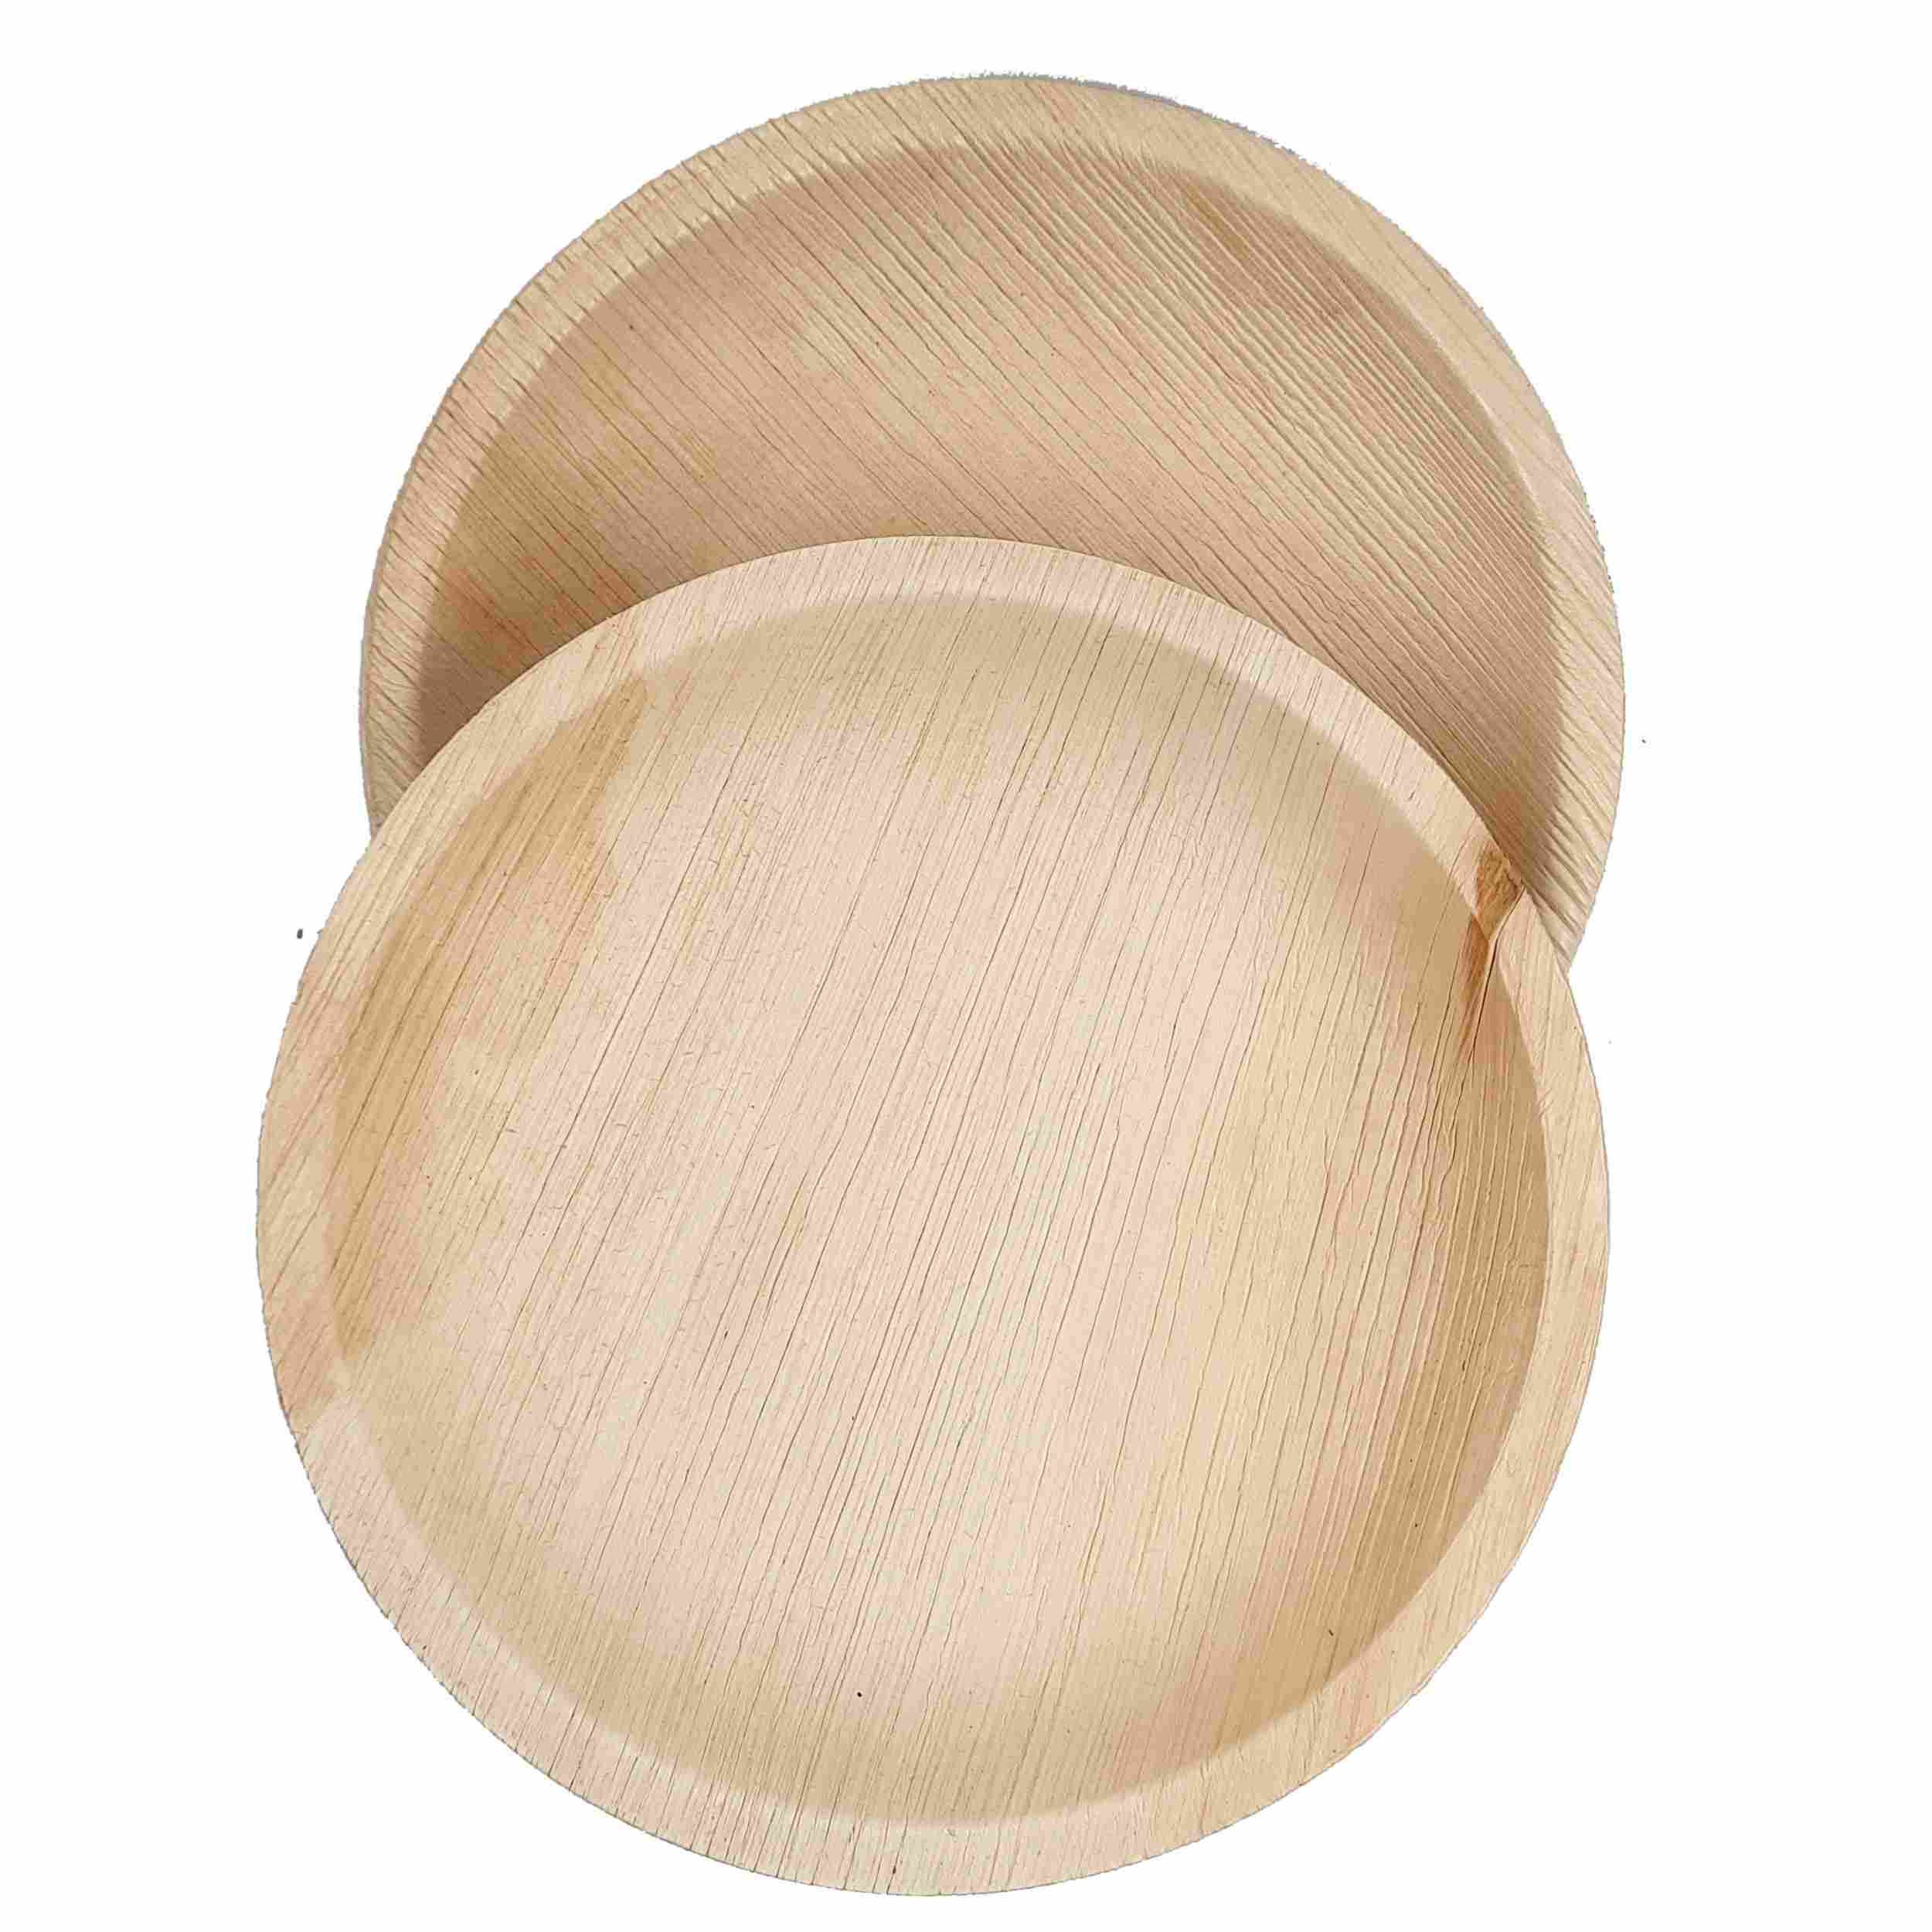 50 x Square Palm Leaf Plates Disposable Bamboo Catering Eco Natural Dinner Party 